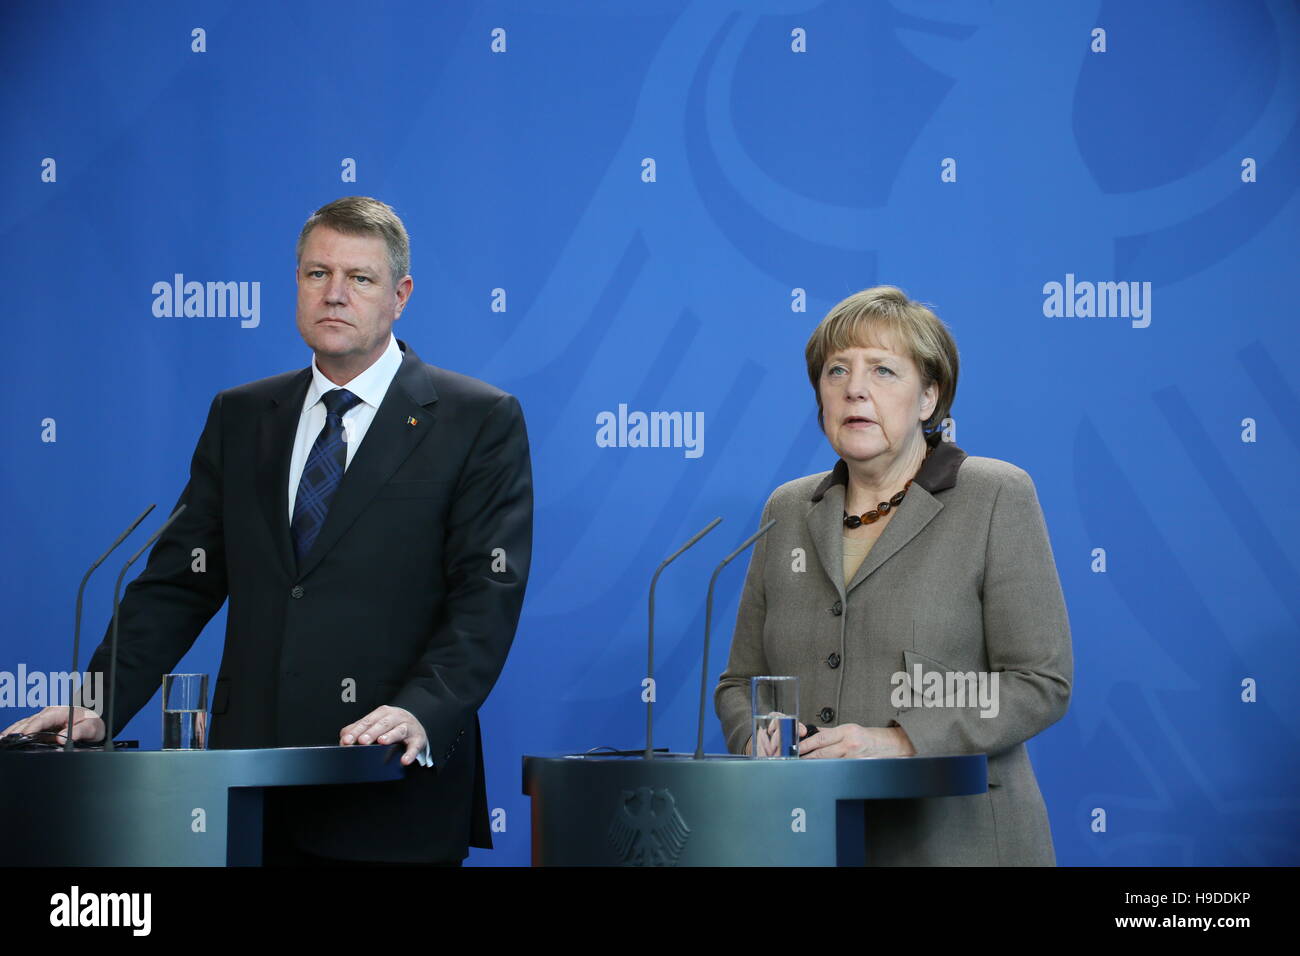 President of Romania Klaus Iohannis gives joint press statement with Chancellor Merkel on February, 26th 2015 in Berlin, Germany Stock Photo